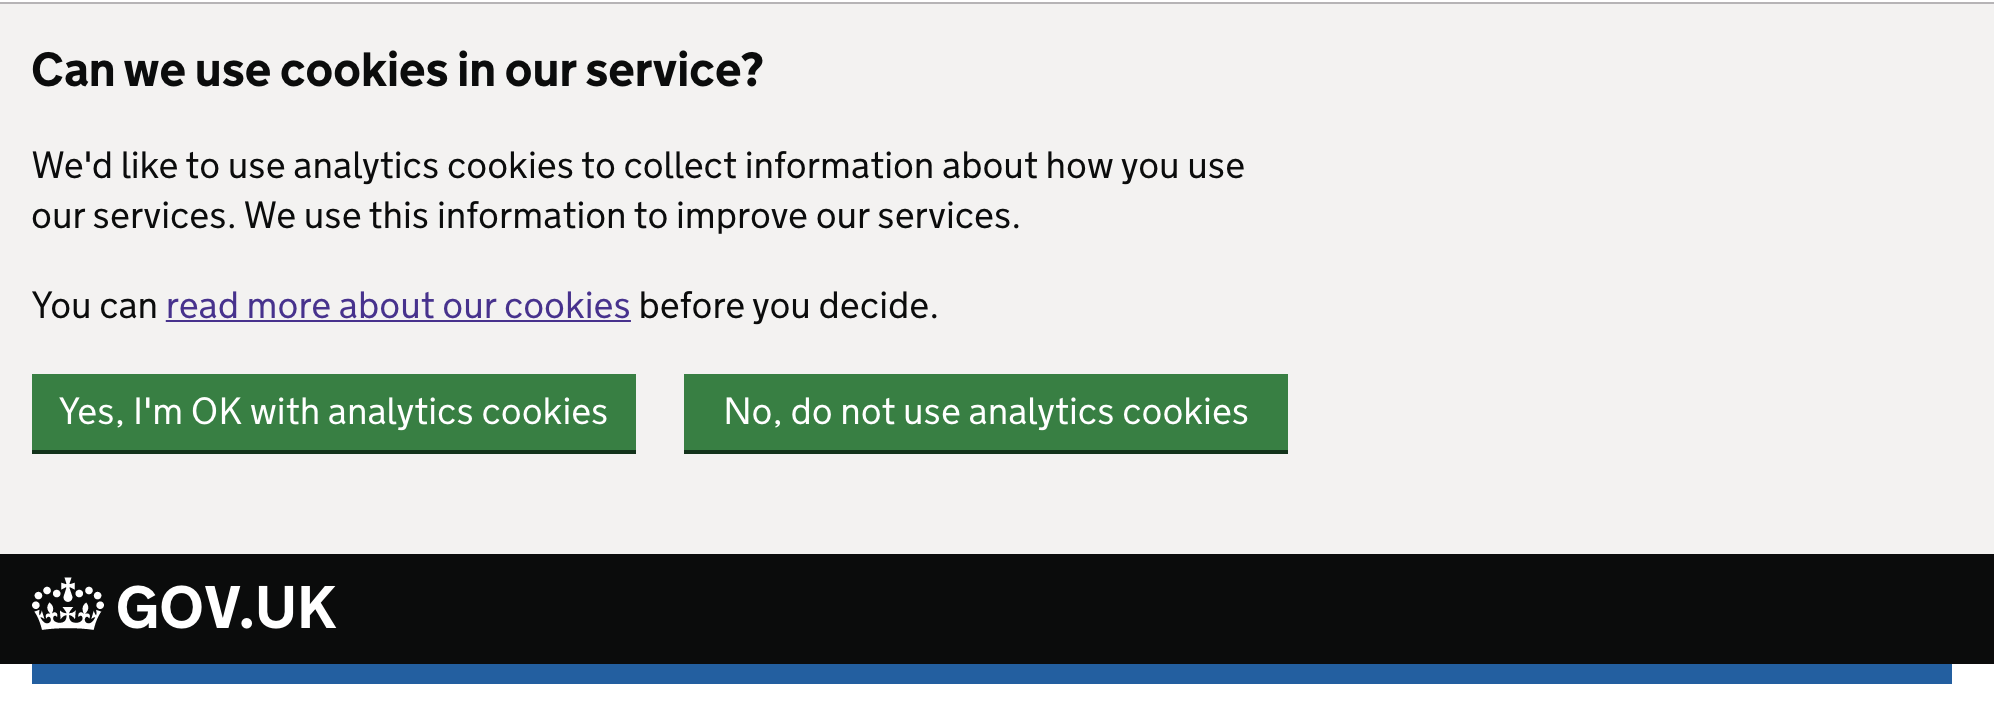 The cookies banner asks users if we can have their permission to use analytics cookies to improve the service. There's a link to read more about cookies before the user decides. It has buttons which allow users to select their preference.